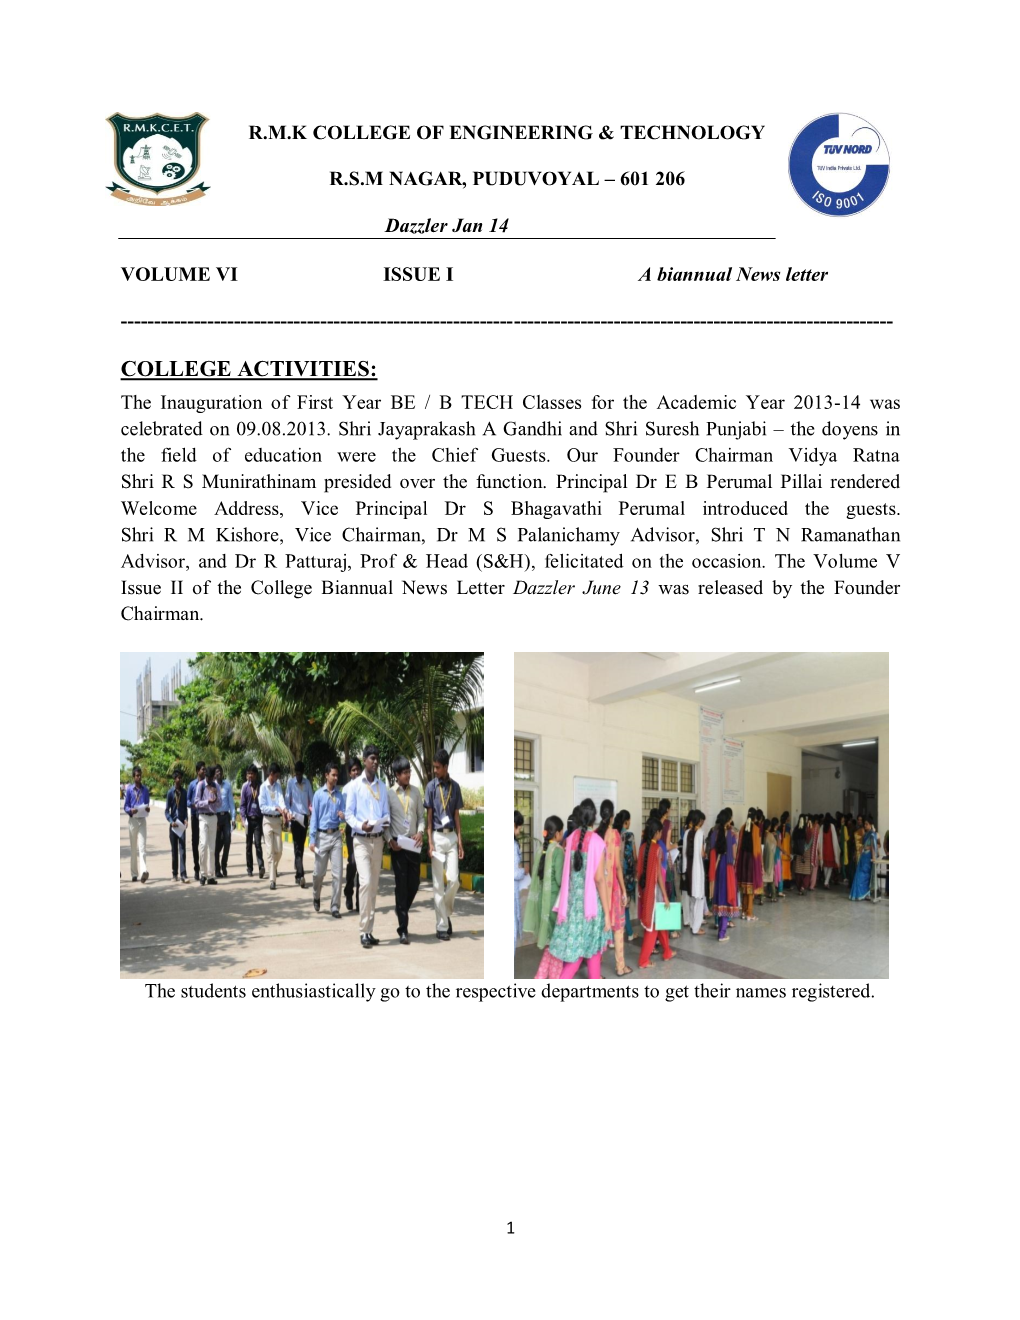 COLLEGE ACTIVITIES: the Inauguration of First Year BE / B TECH Classes for the Academic Year 2013-14 Was Celebrated on 09.08.2013